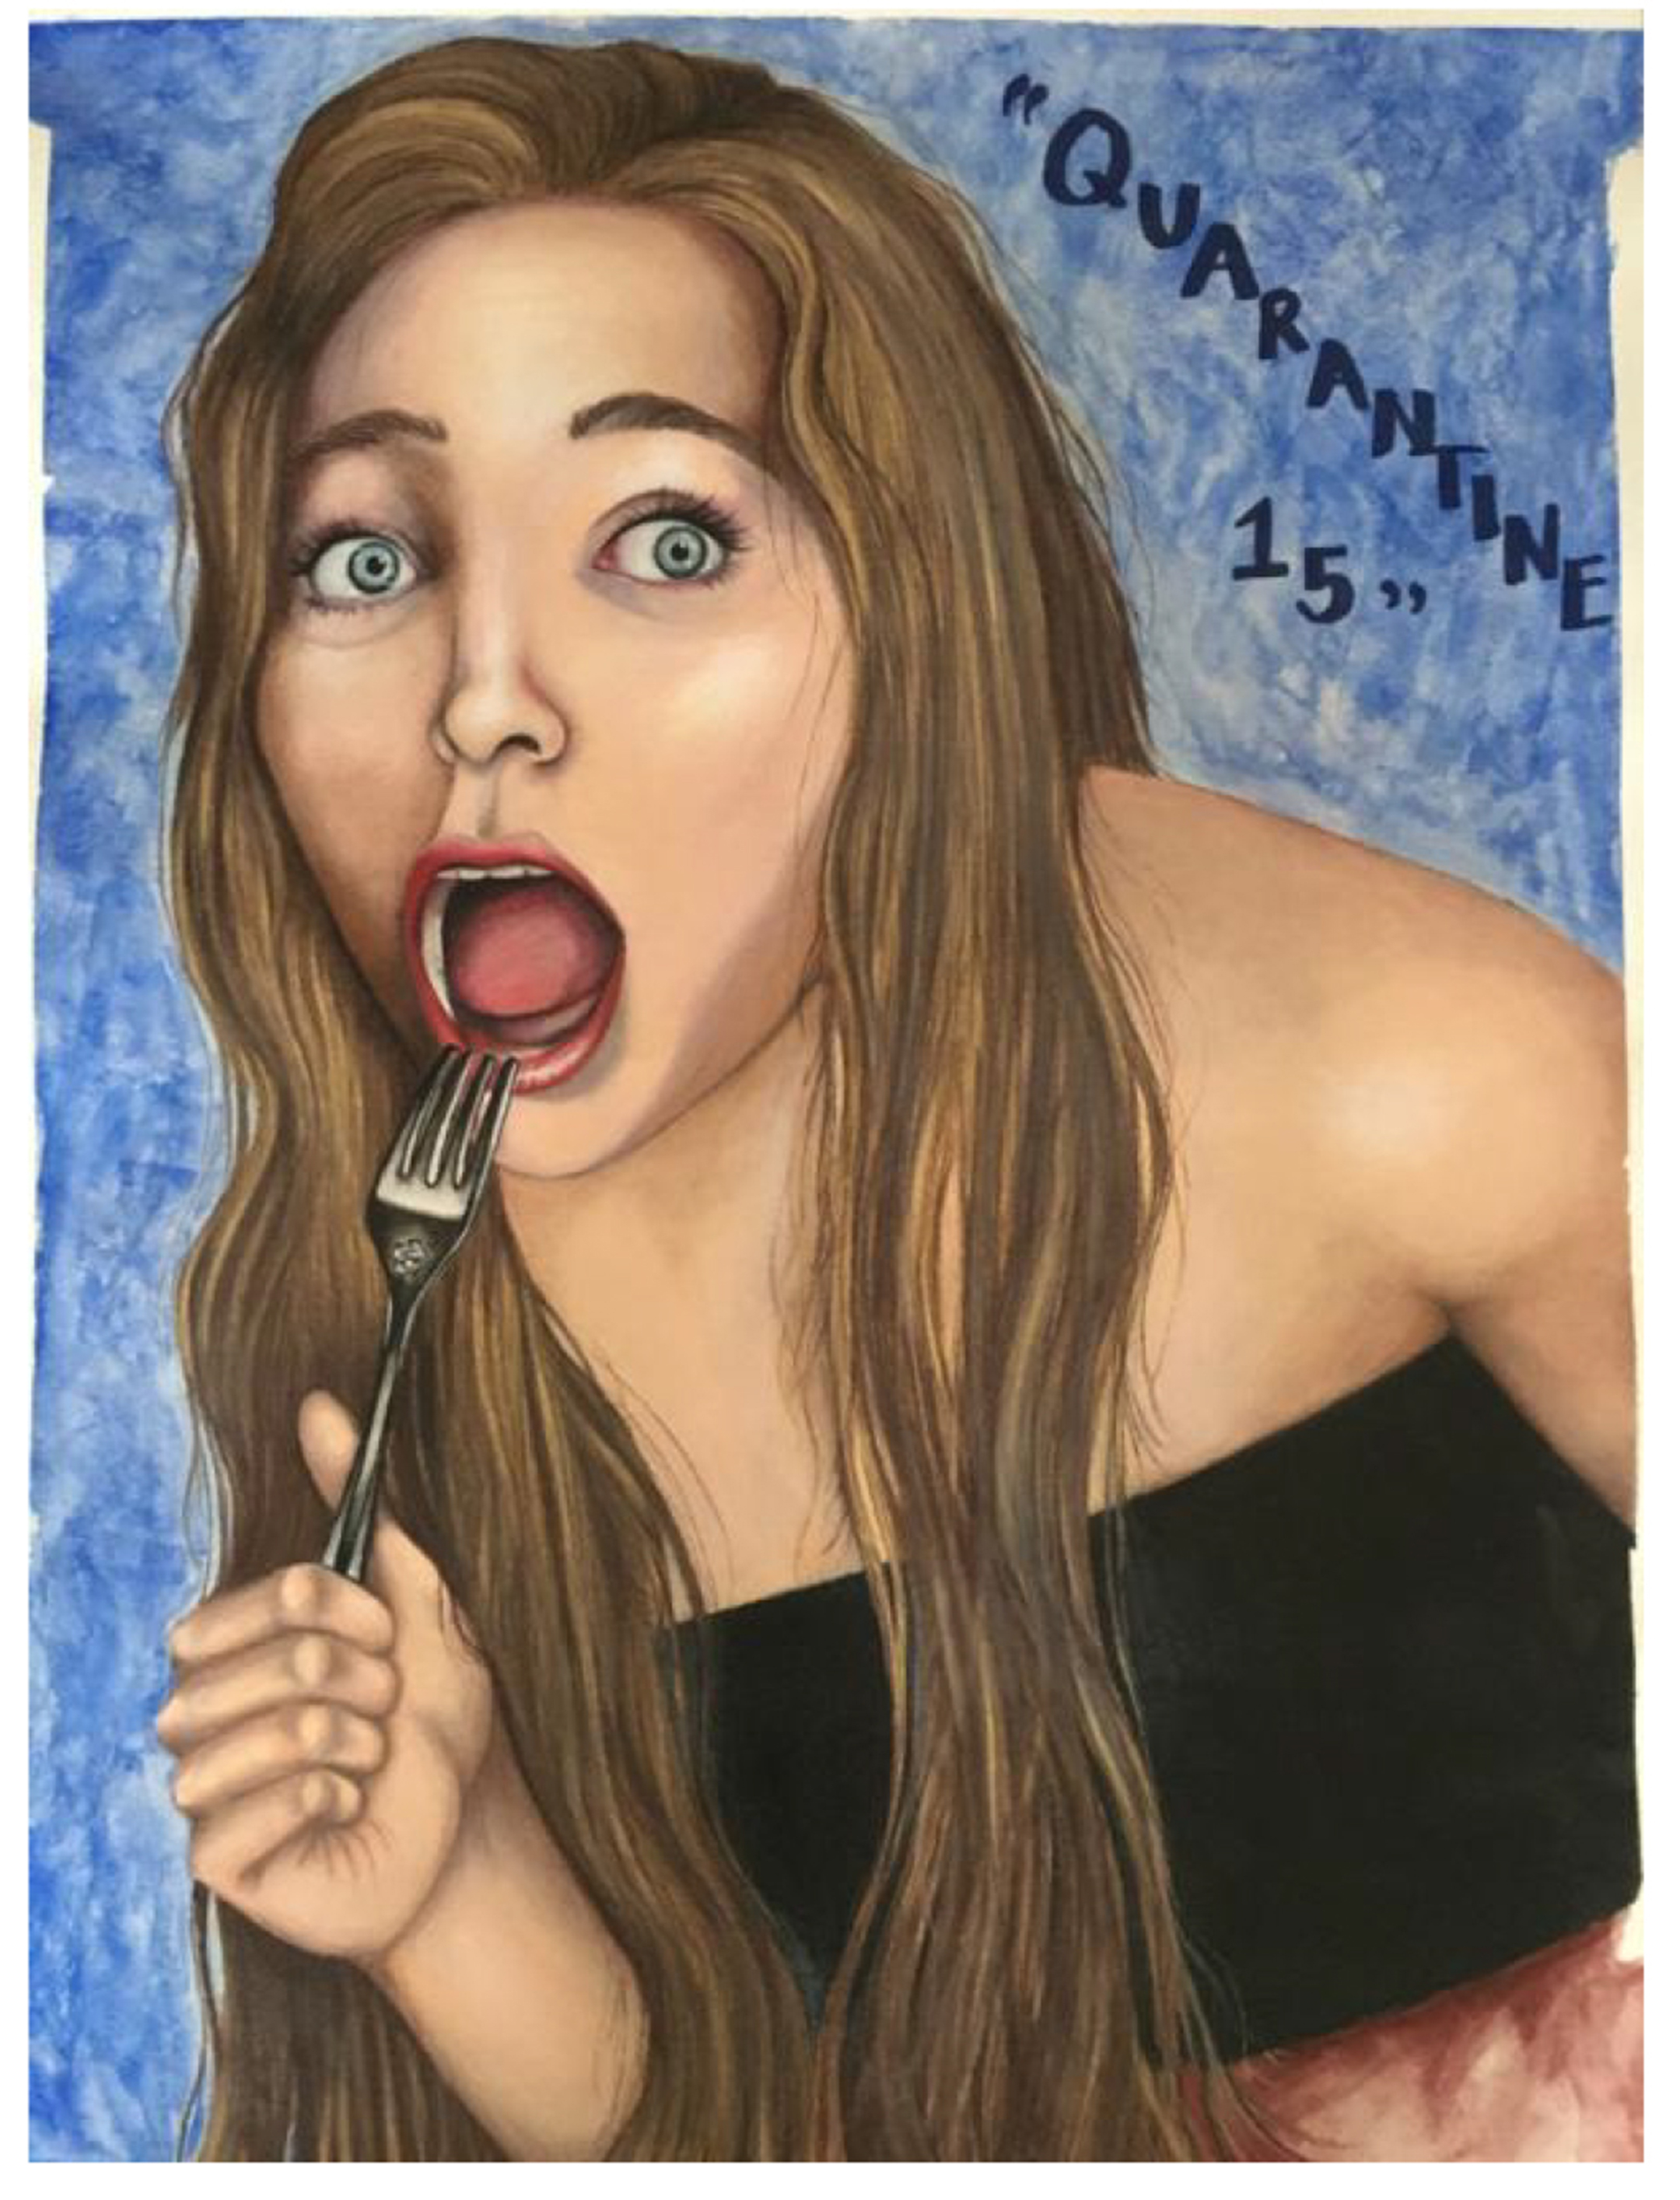 Illustration of a young woman holding a fork at her open mouth